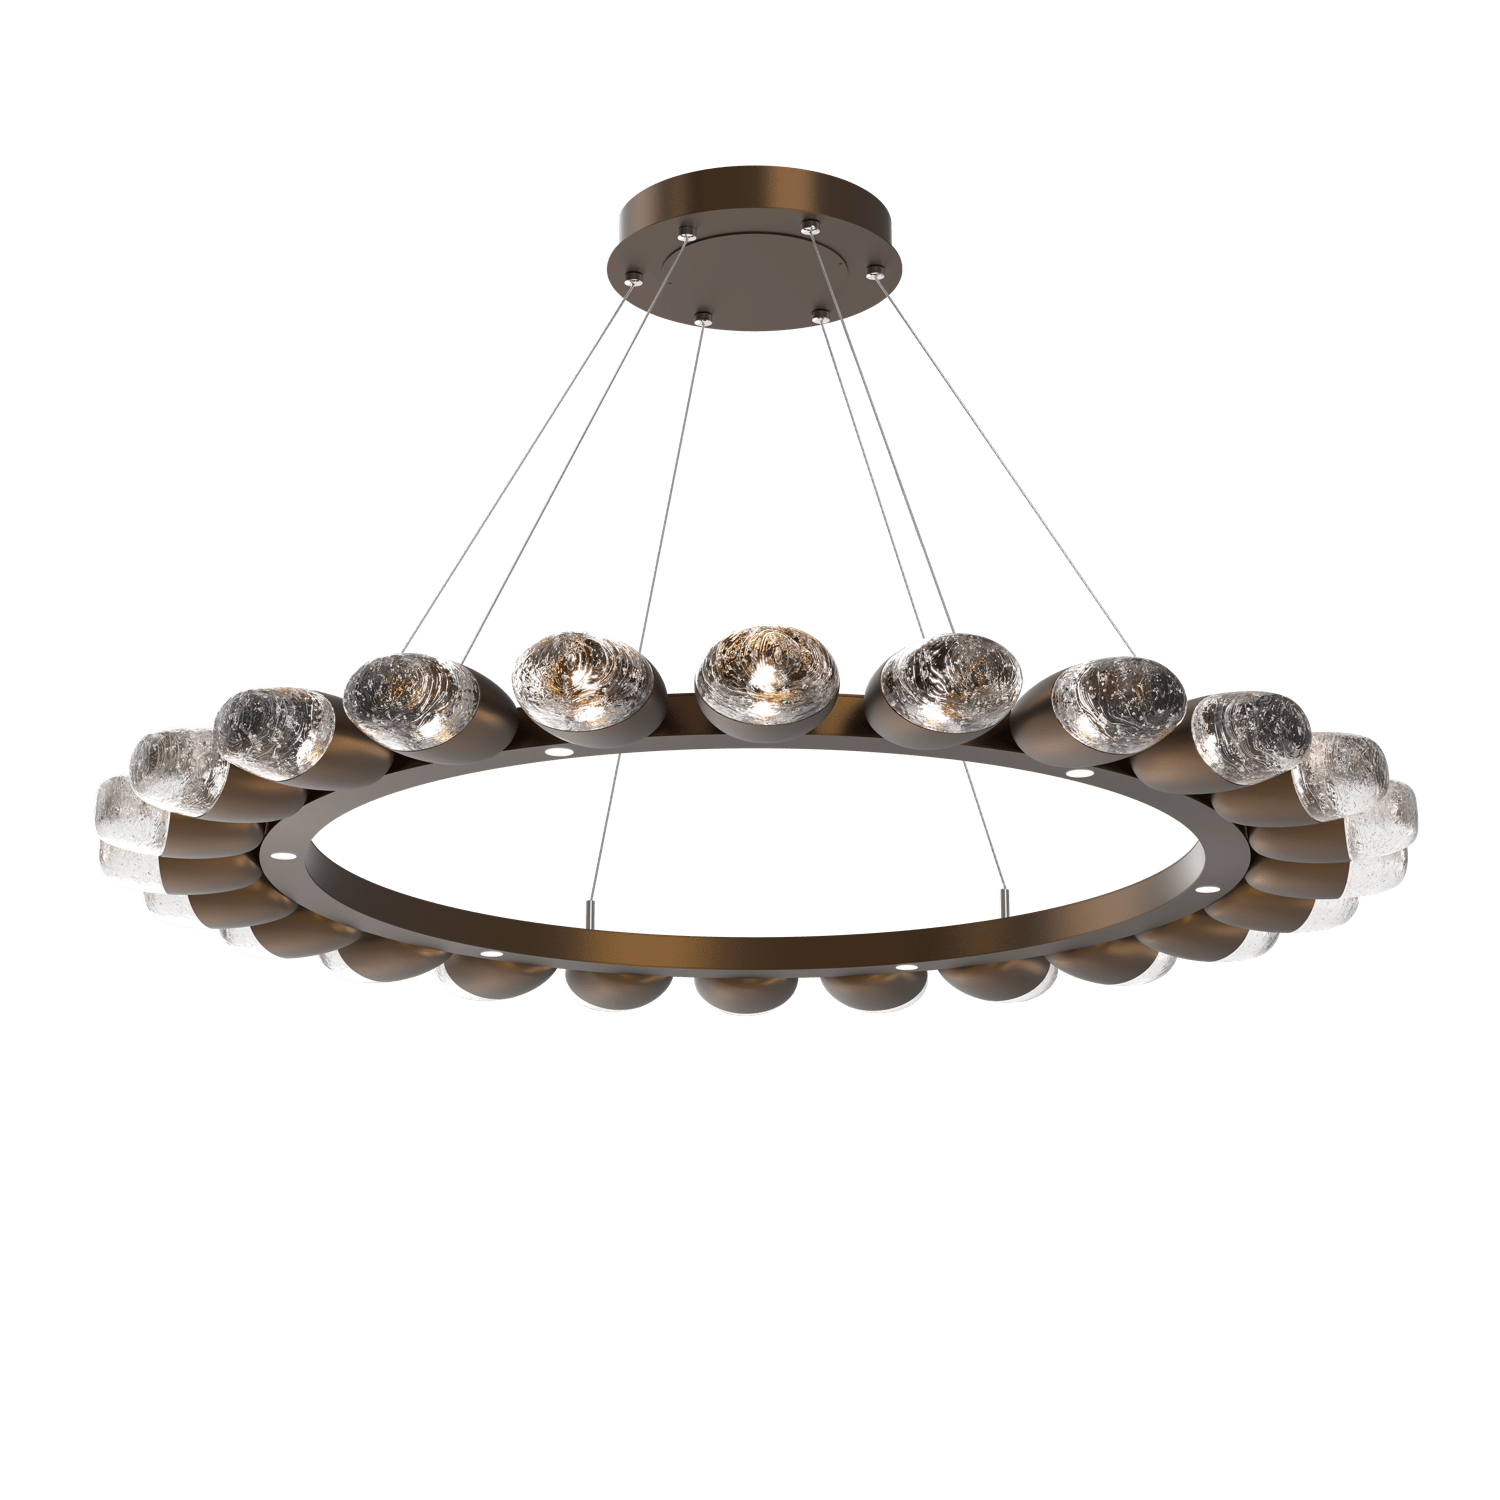 CHB0079-48-FB-Hammerton-Studio-Pebble-48-inch-radial-ring-chandelier-with-flat-bronze-finish-and-clear-cast-glass-shades-and-LED-lamping